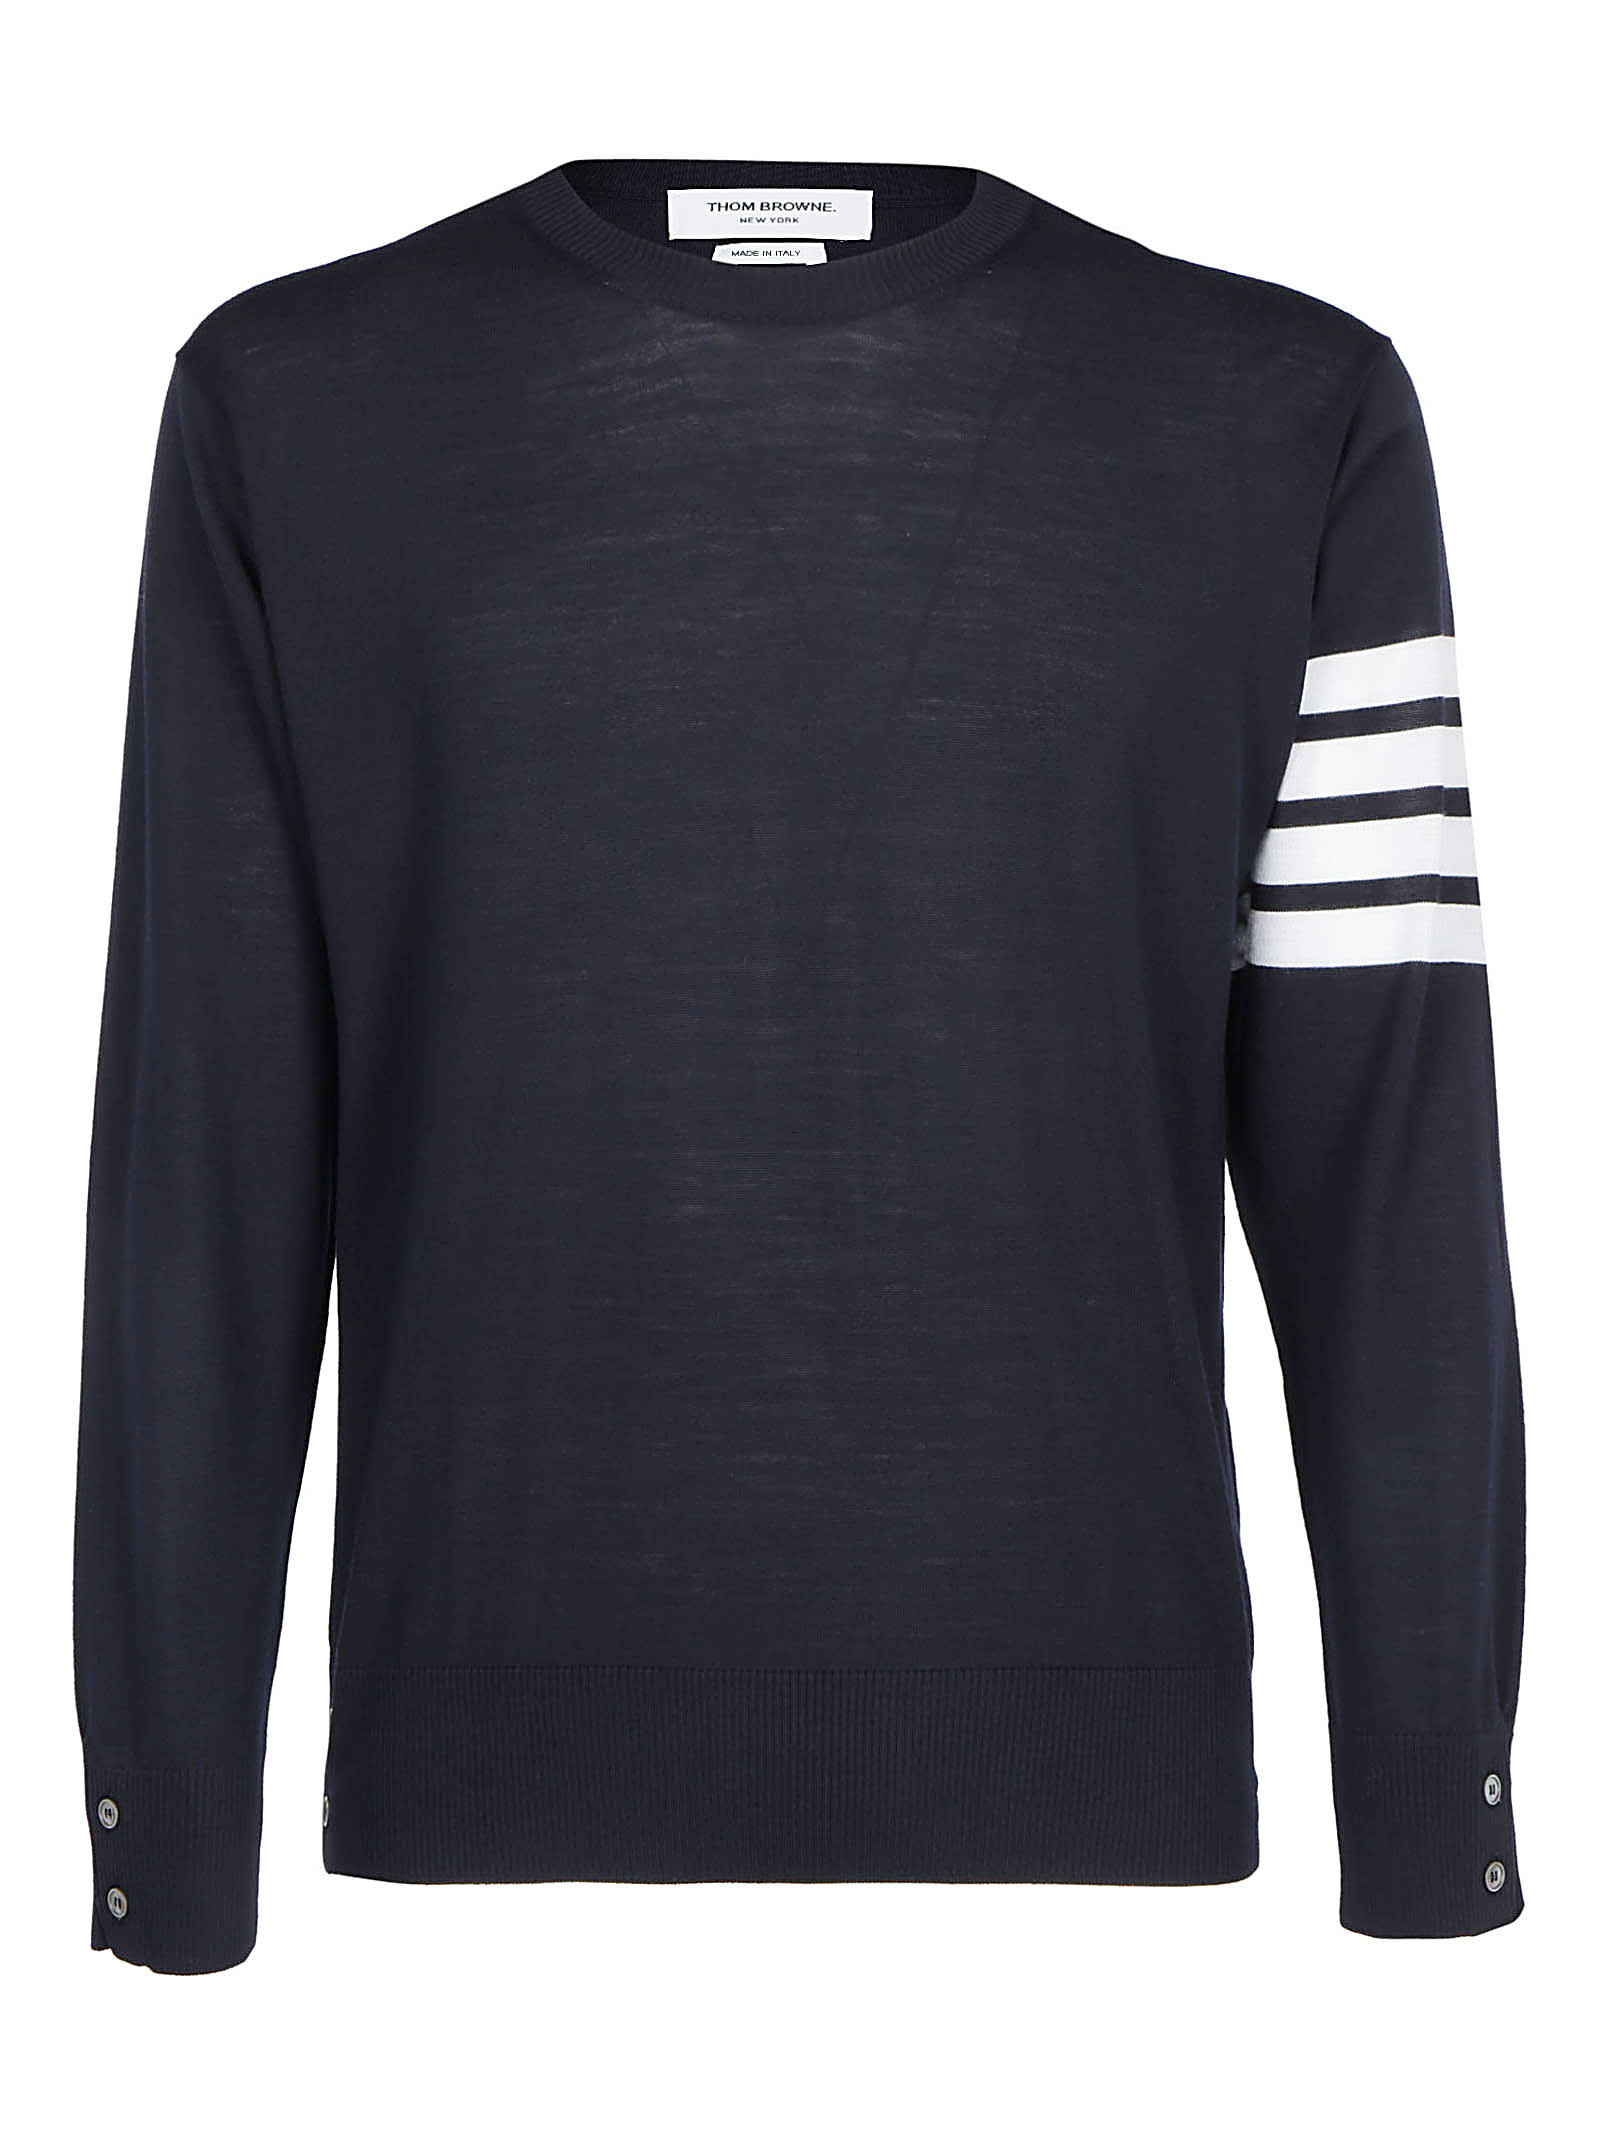 Thom Browne Sweater. In Navy